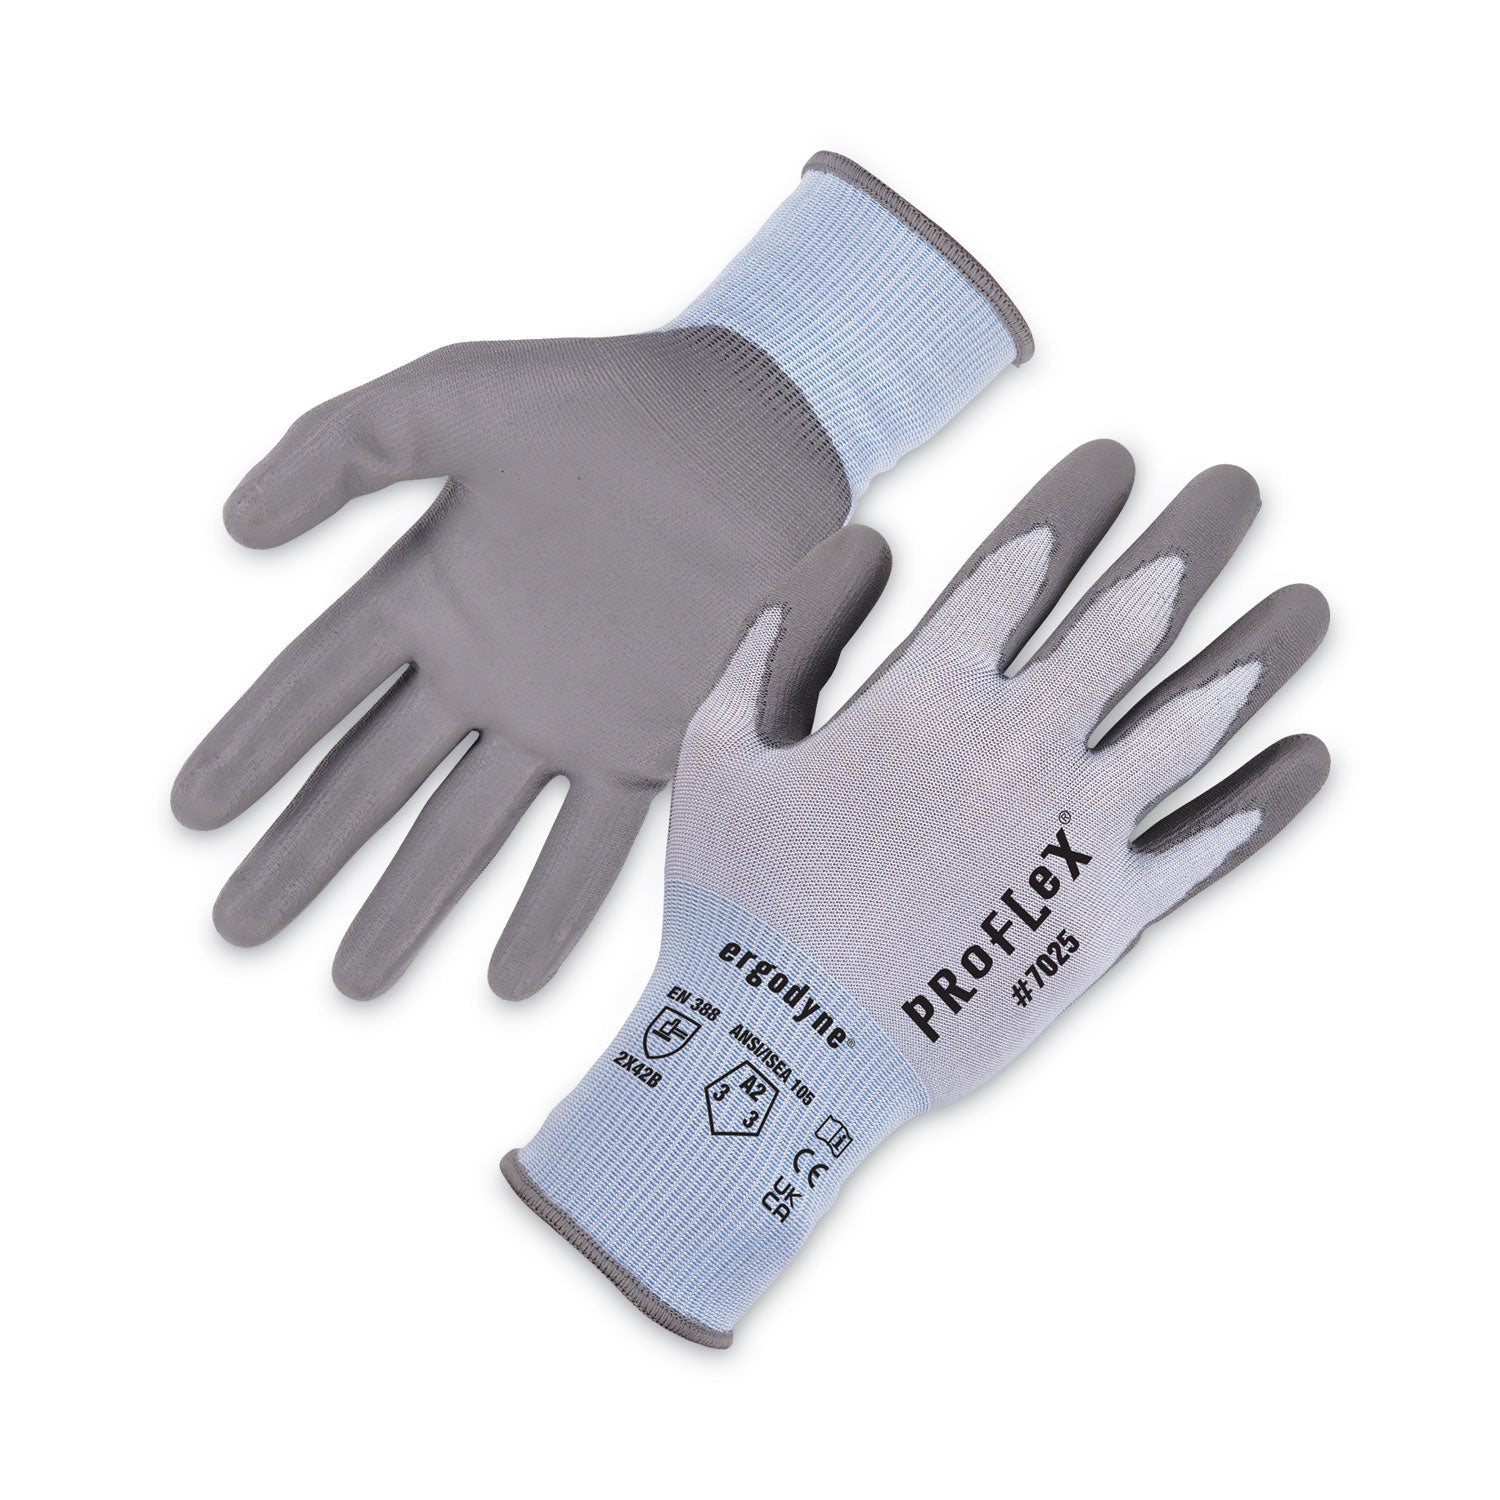 proflex-7025-ansi-a2-pu-coated-cr-gloves-blue-x-large-12-pairs-pack-ships-in-1-3-business-days_ego10425 - 1